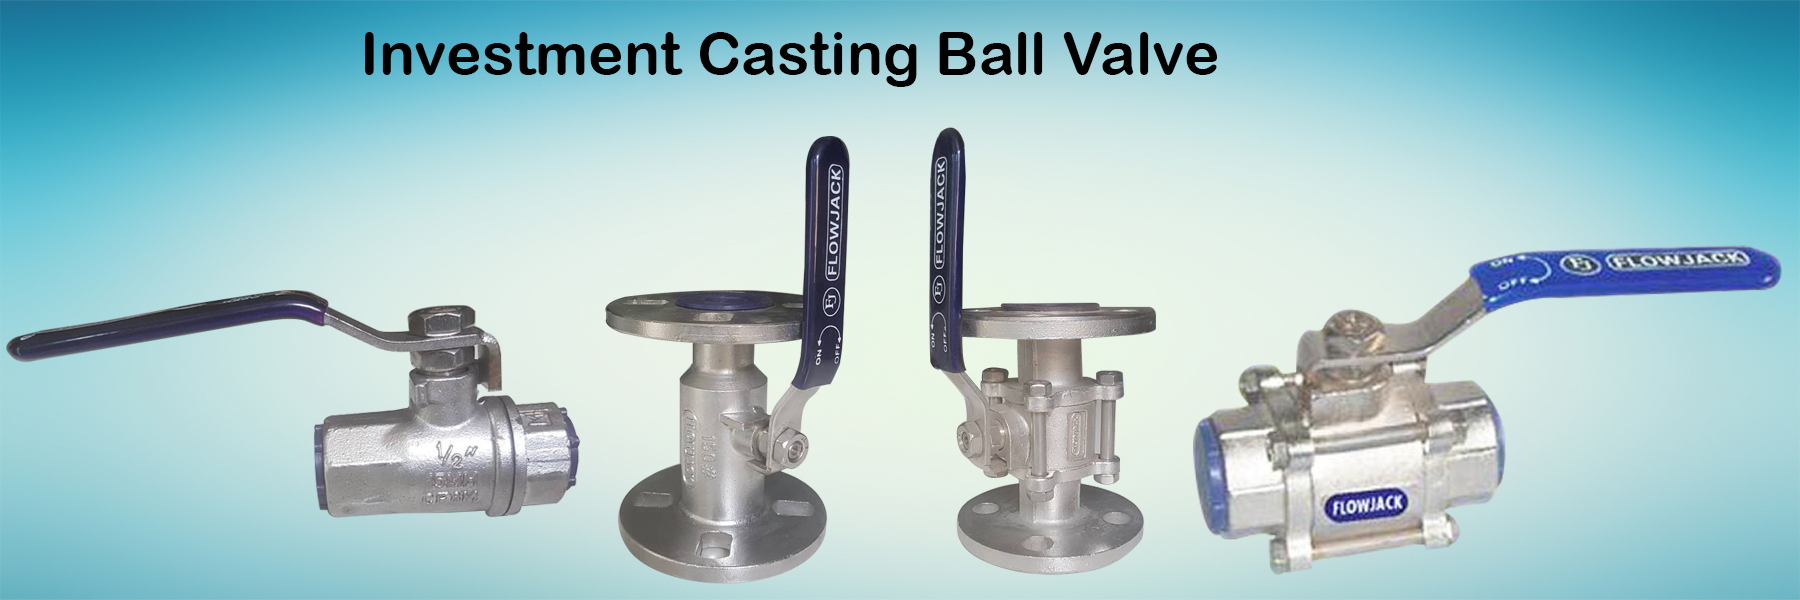 1 Investment Casting Ball Valve Manufacturers 